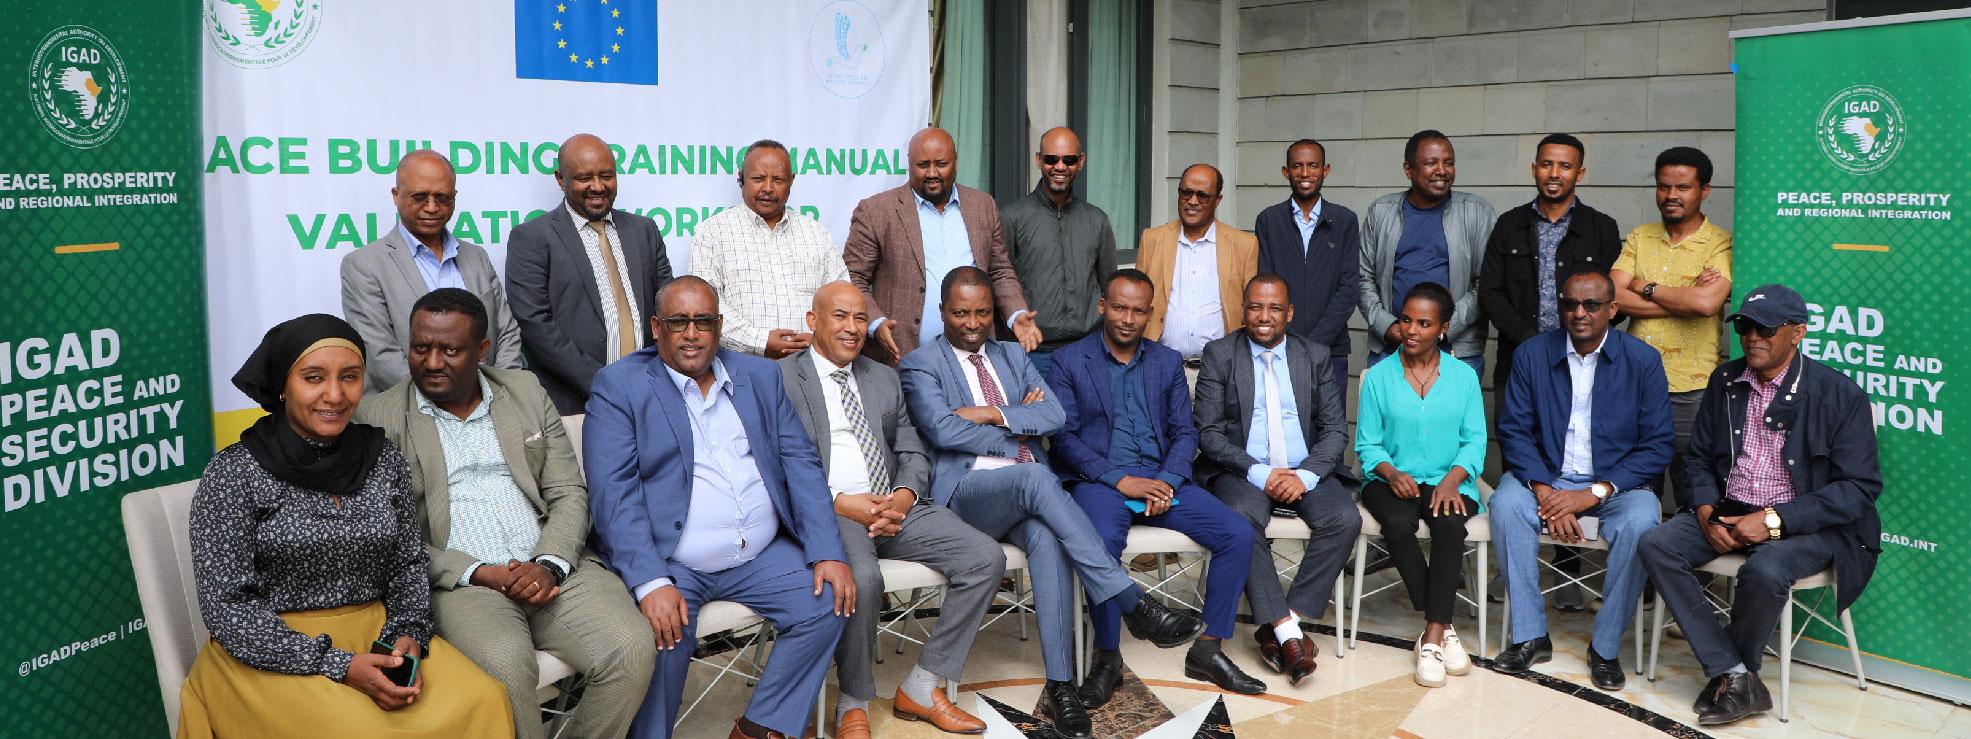 IGAD Peace and Security Division and the Ethiopian Ministry of Peace Collaborate for Sustainable Peace as they Validate the Draft Peace-Building Manual.